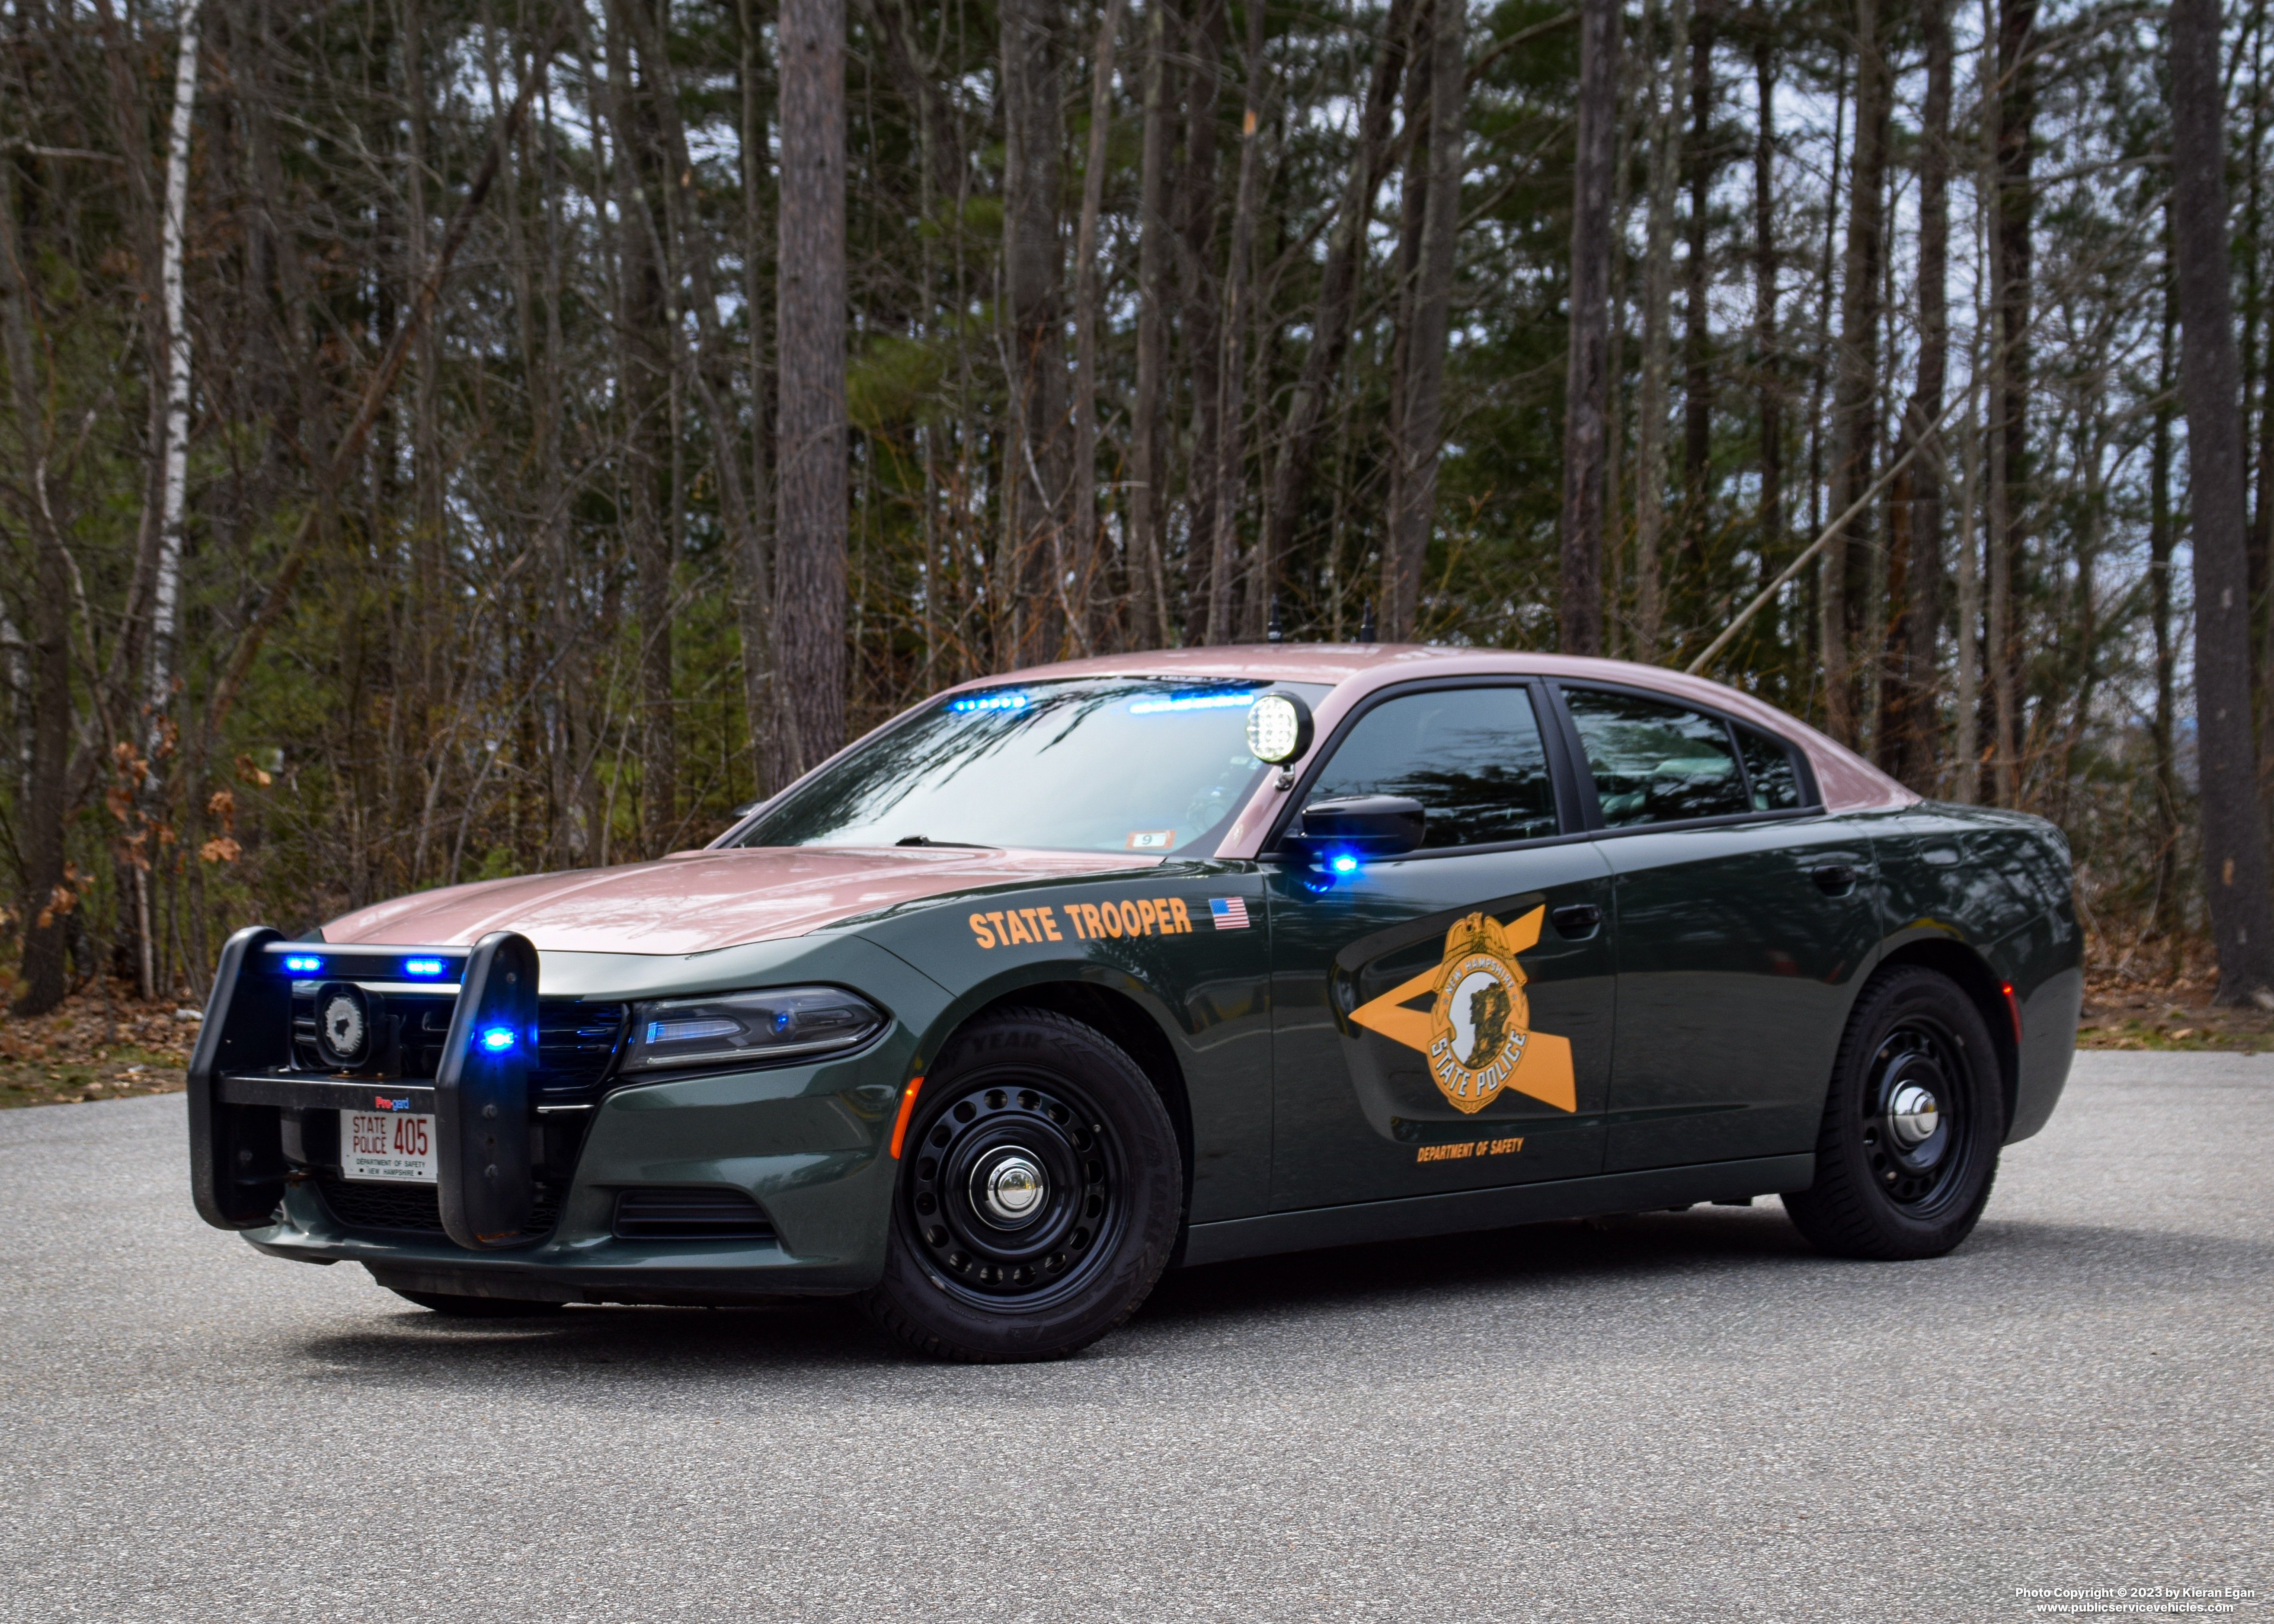 A photo  of New Hampshire State Police
            Cruiser 405, a 2018-2021 Dodge Charger             taken by Kieran Egan